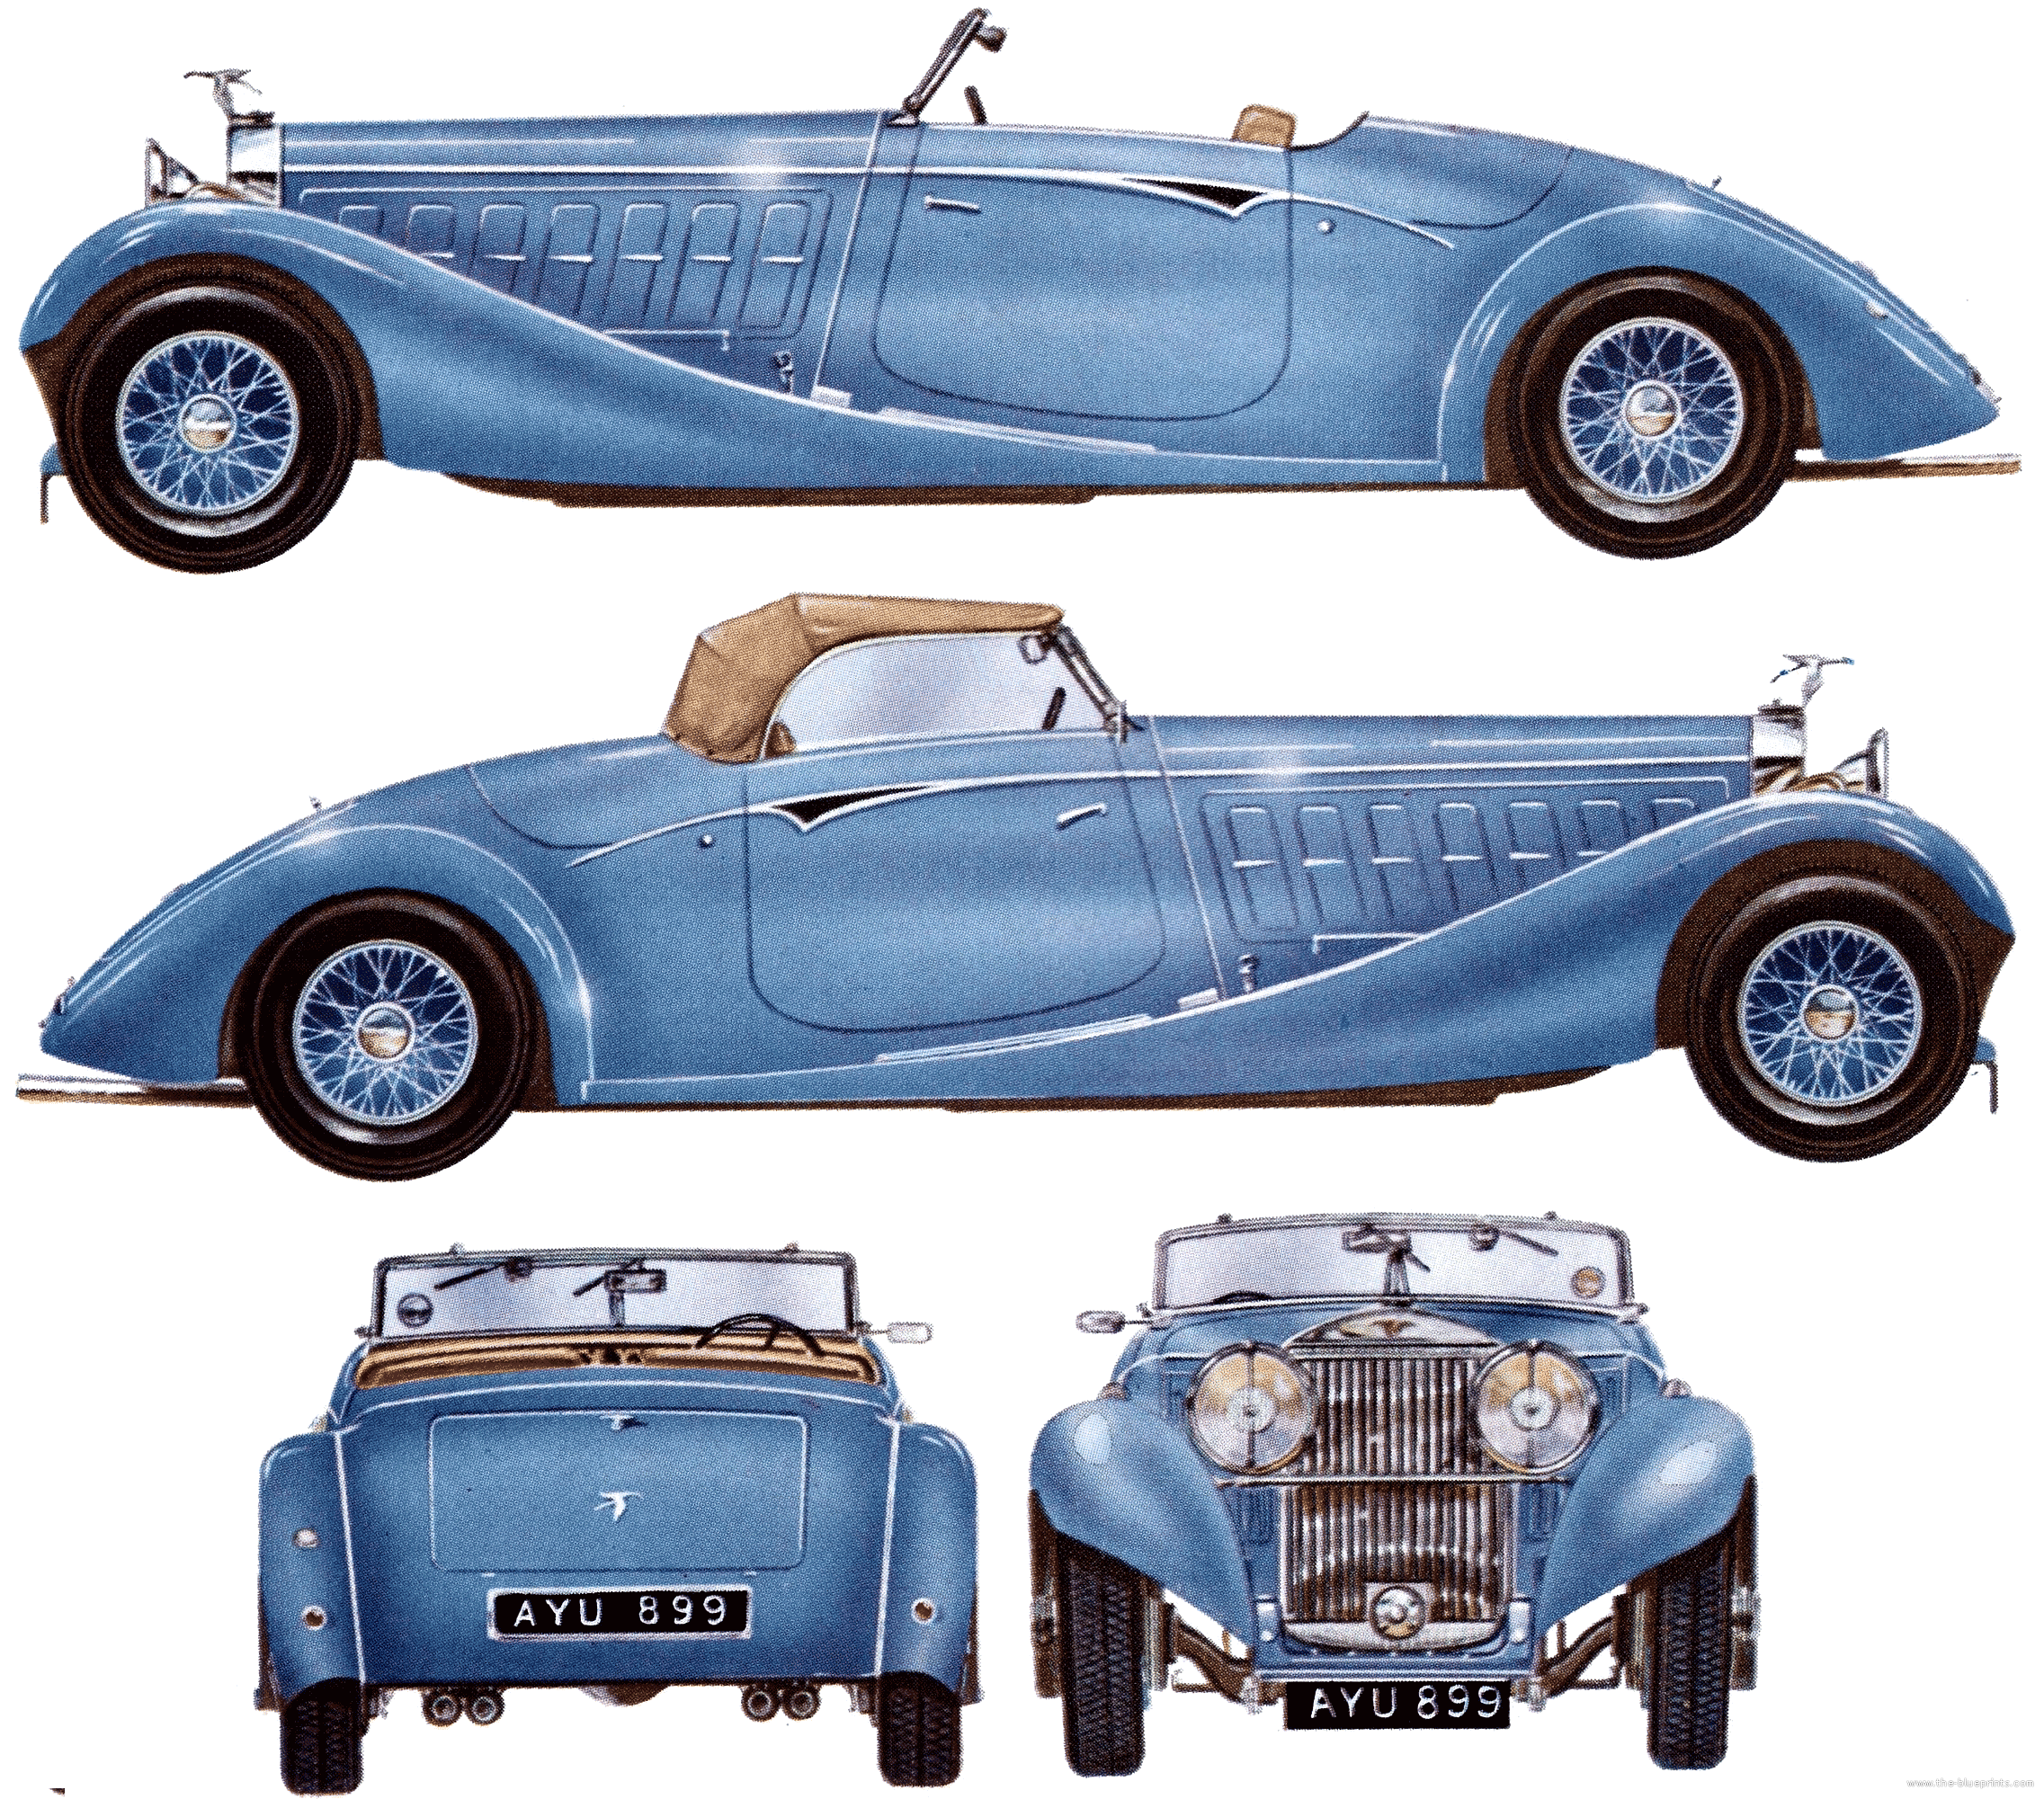 hispano-suiza-type-68-bis-v12-dhc.png